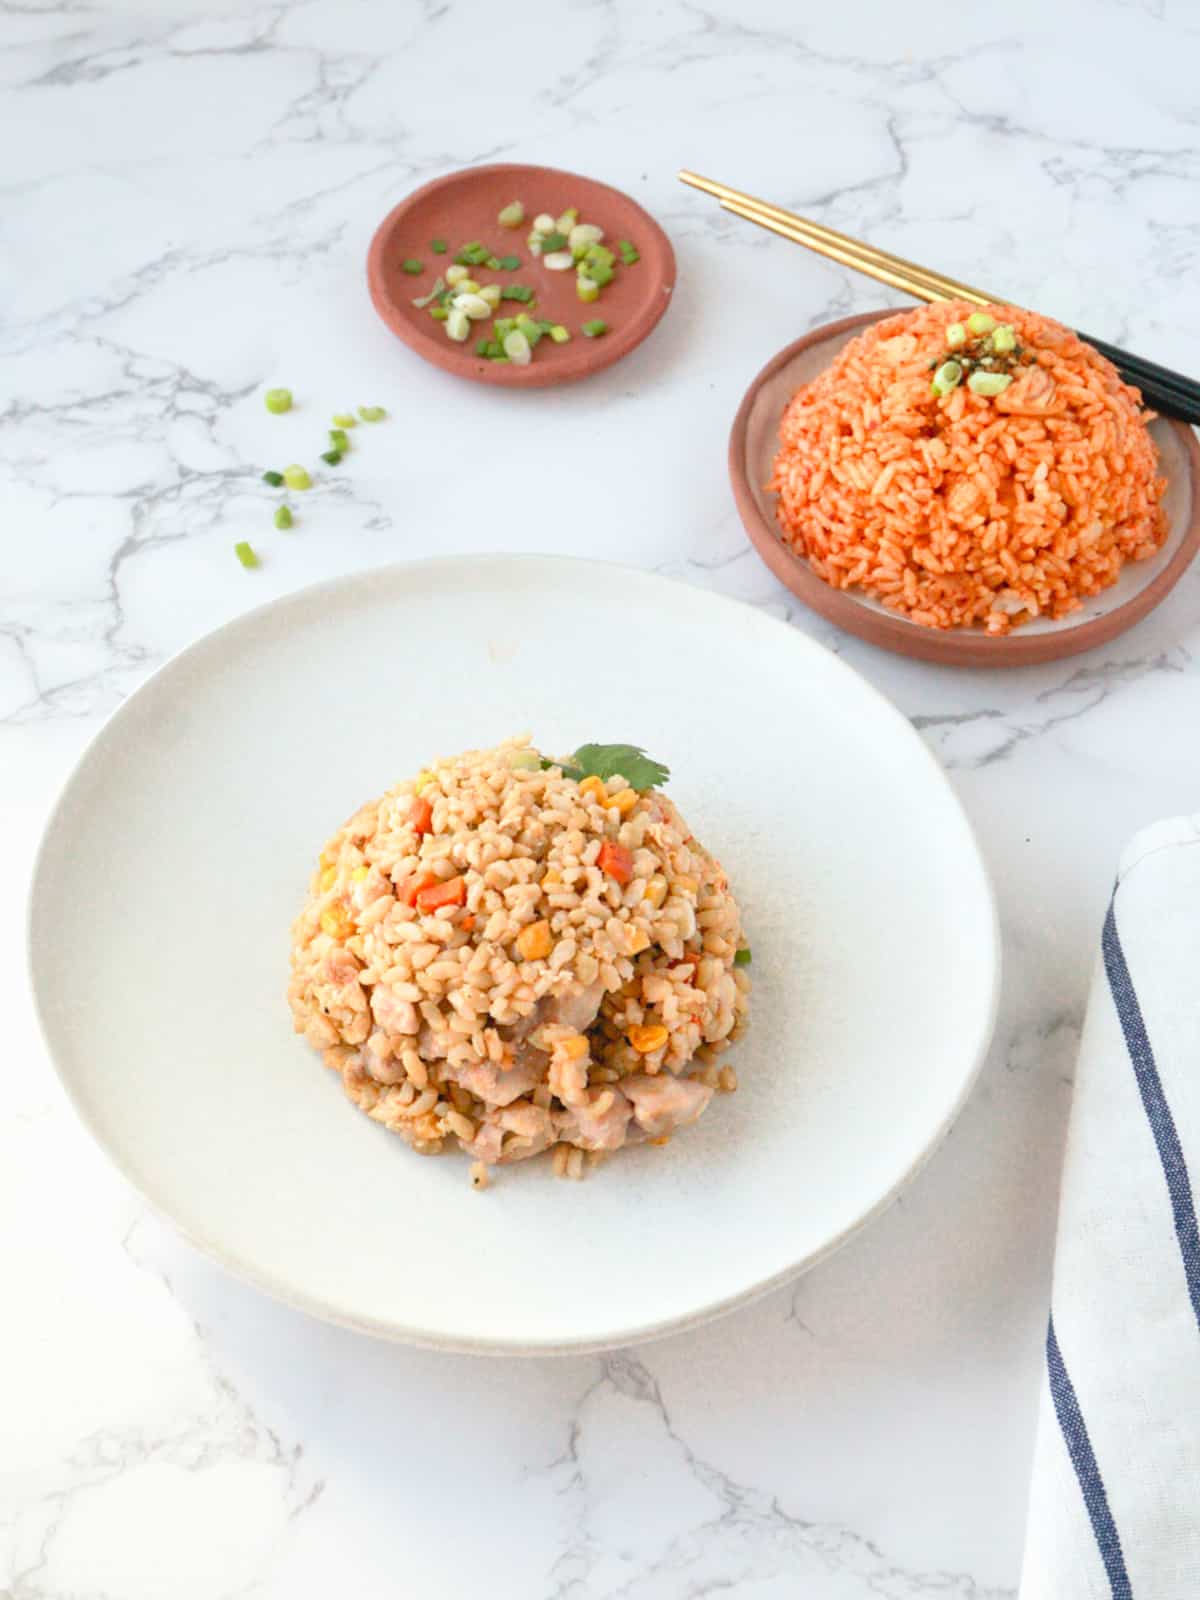 An assortment of various fried rice dishes on a dining table.